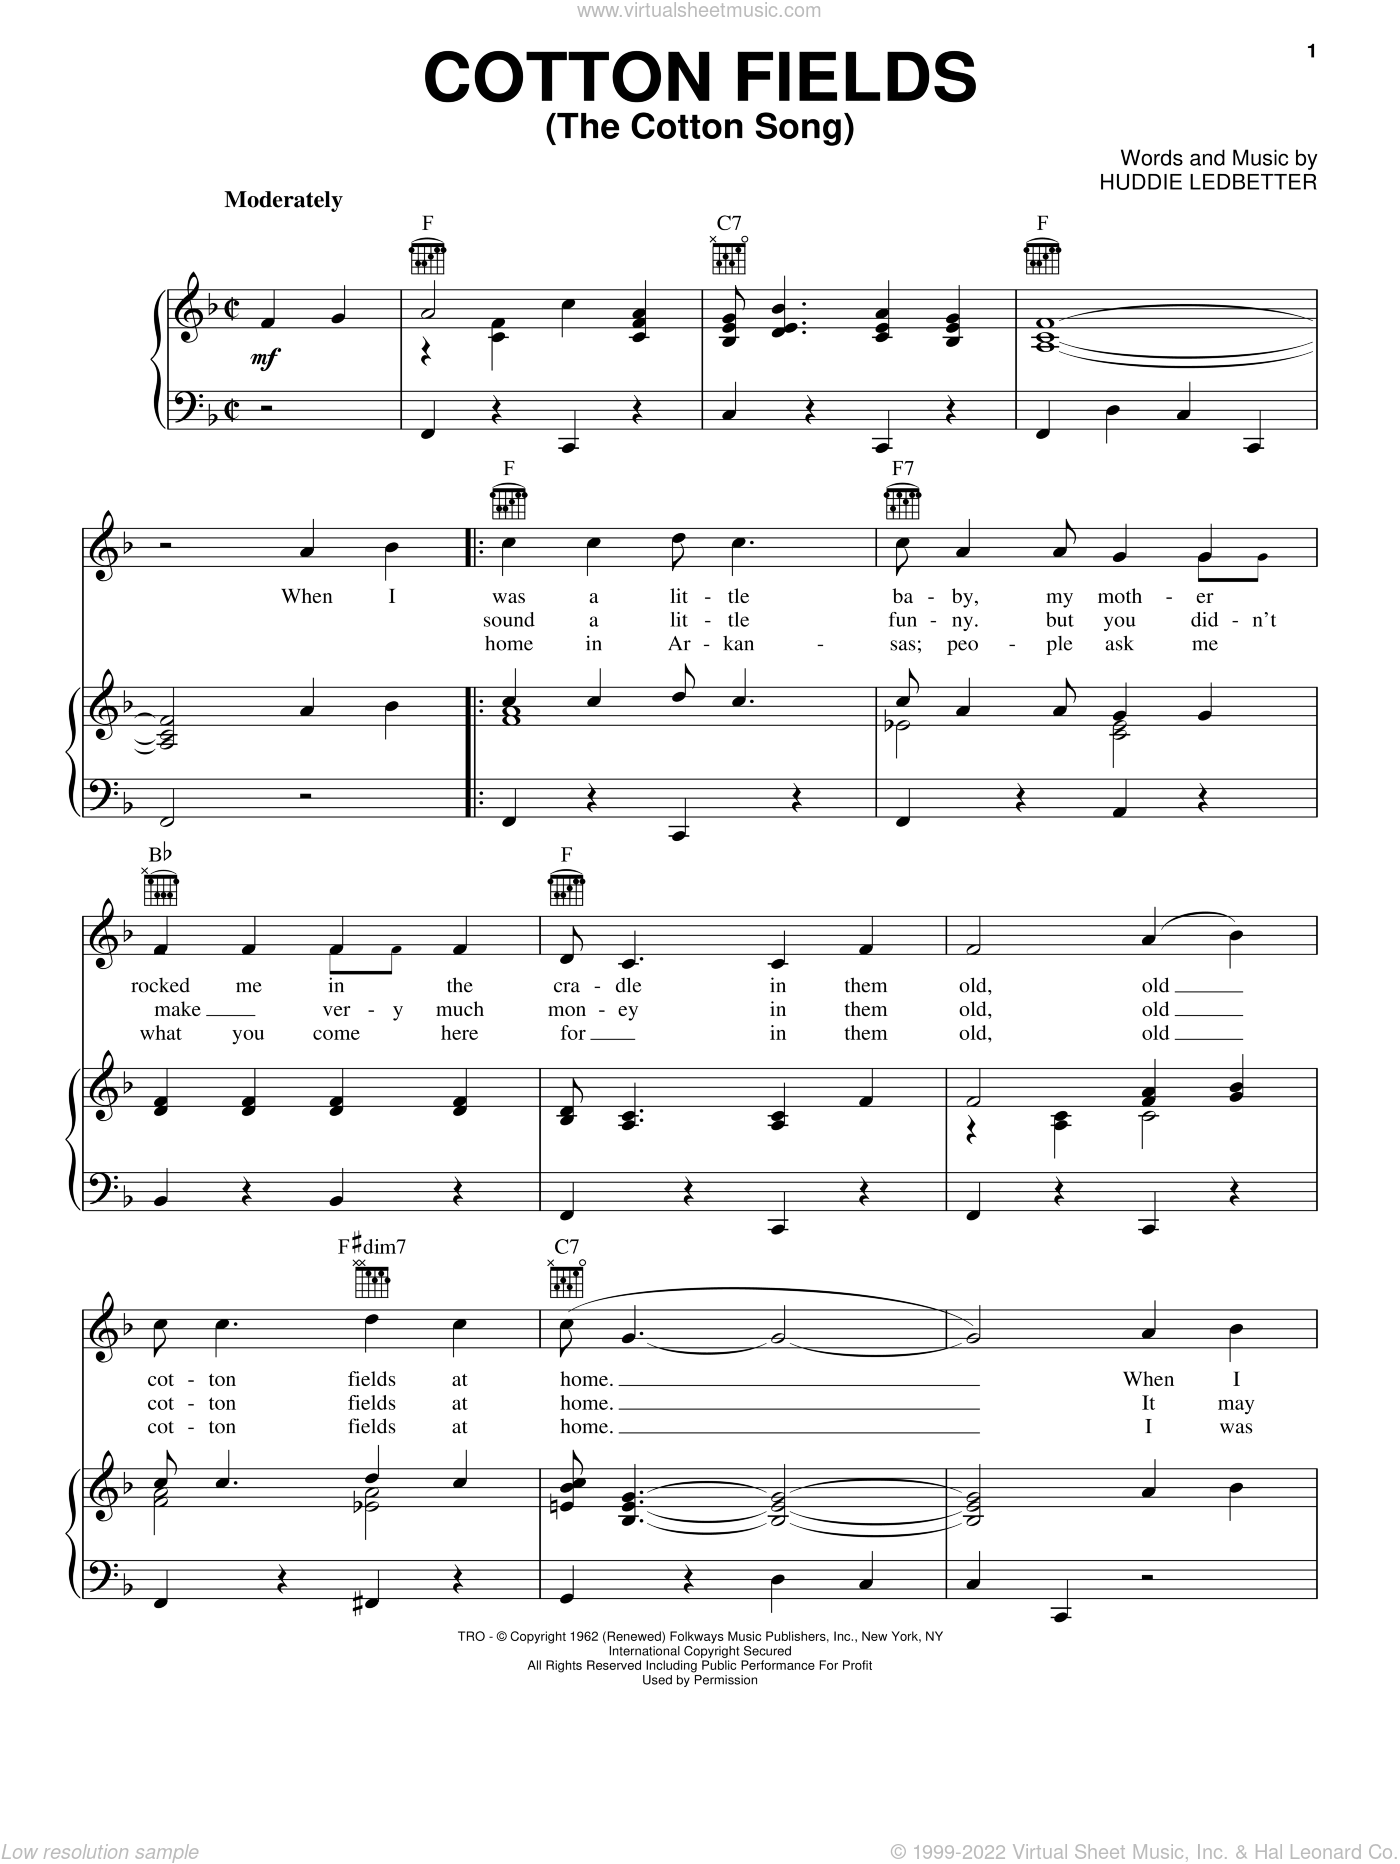 Ledbetter - Cotton Fields (The Cotton Song) sheet music for voice